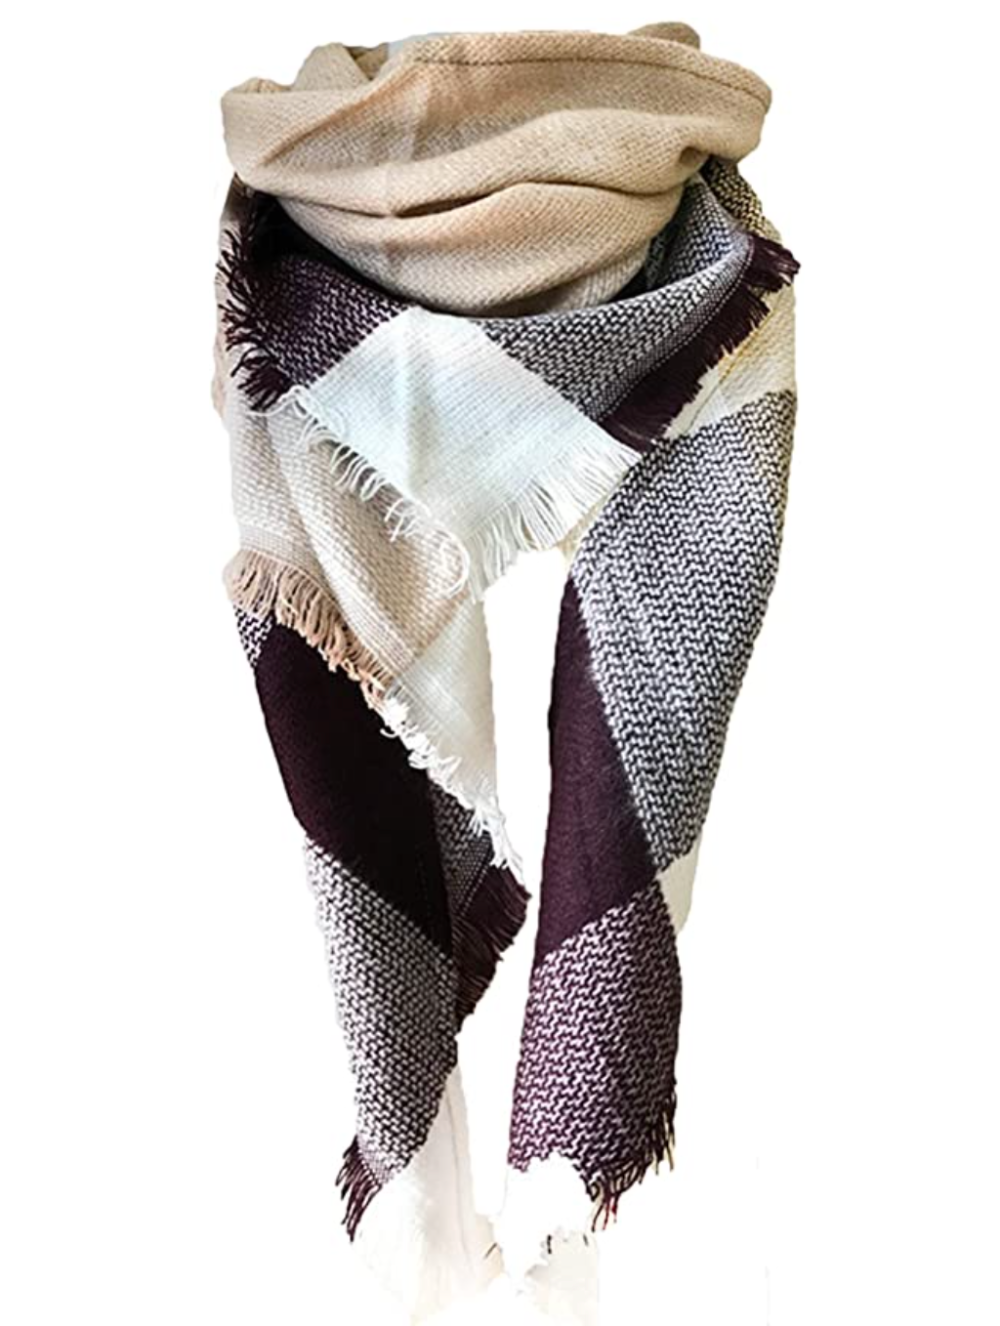 Wander Agio Bestselling Scarf Starts at $13 and Feels Like